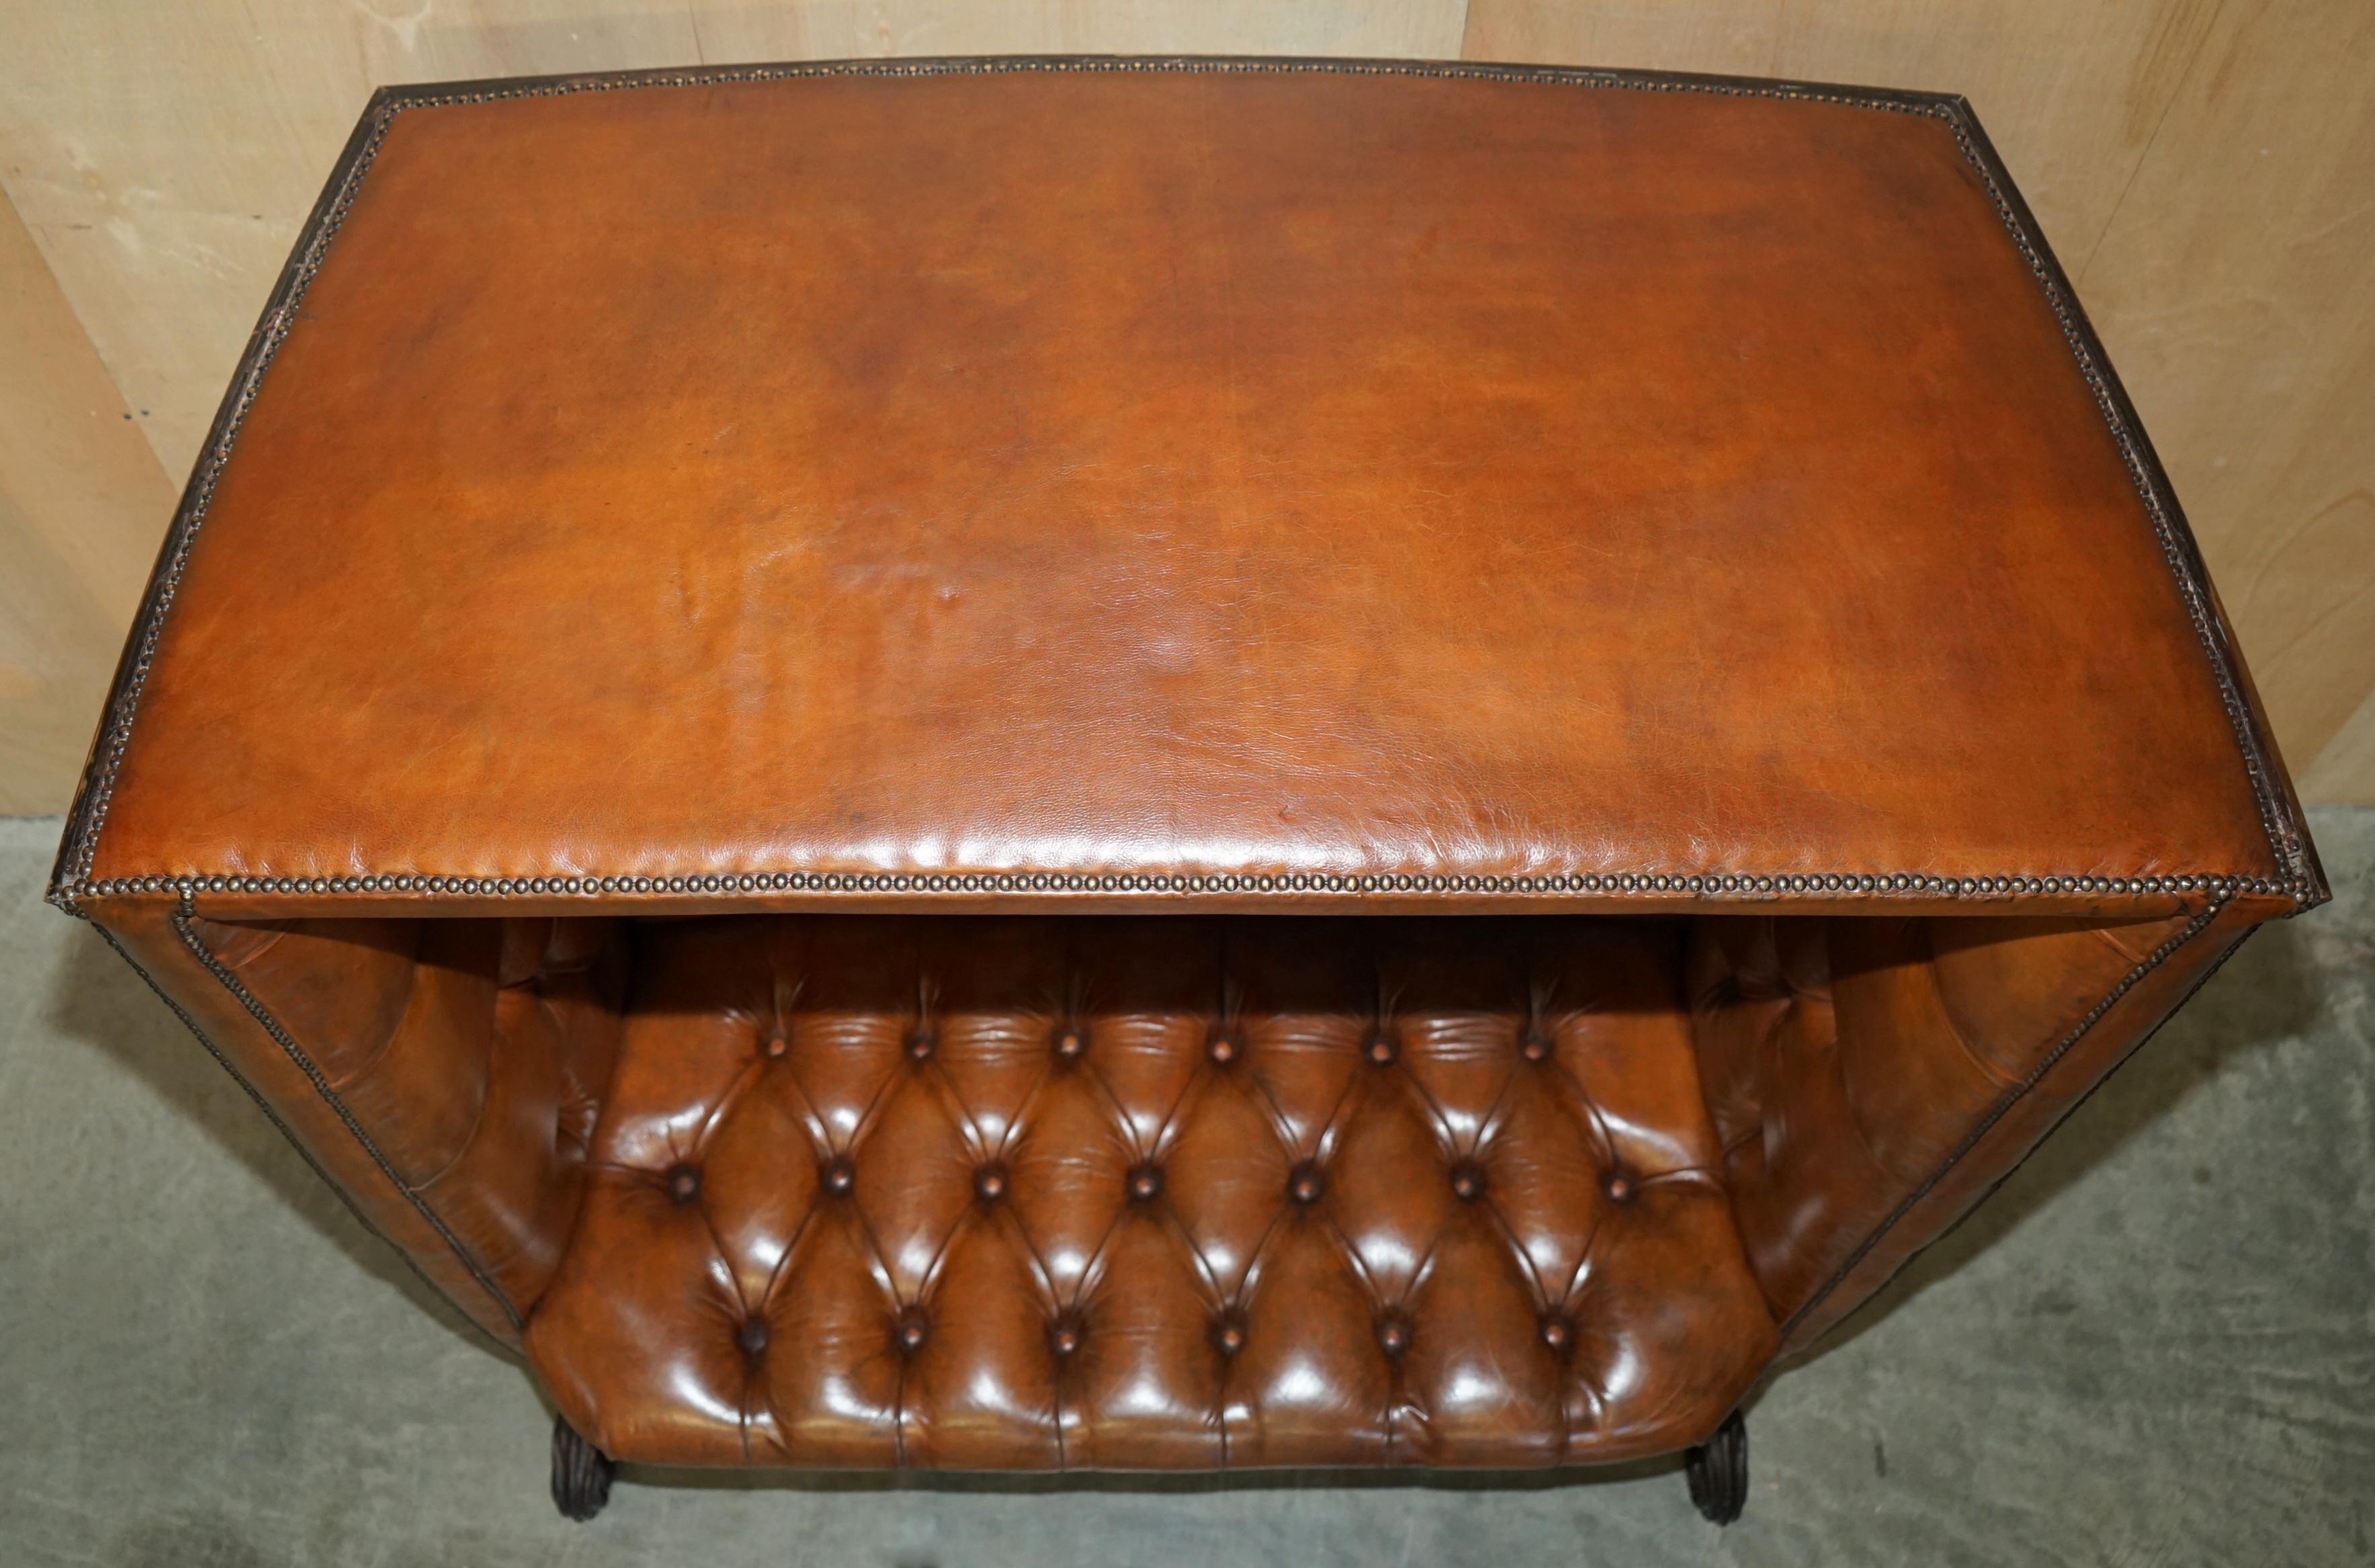 RESTORED BROWN LEATHER ViCTORIAN CARRIAGE SEAT SOFA ROYAL ARMORIAL COAT OF ARMS For Sale 5